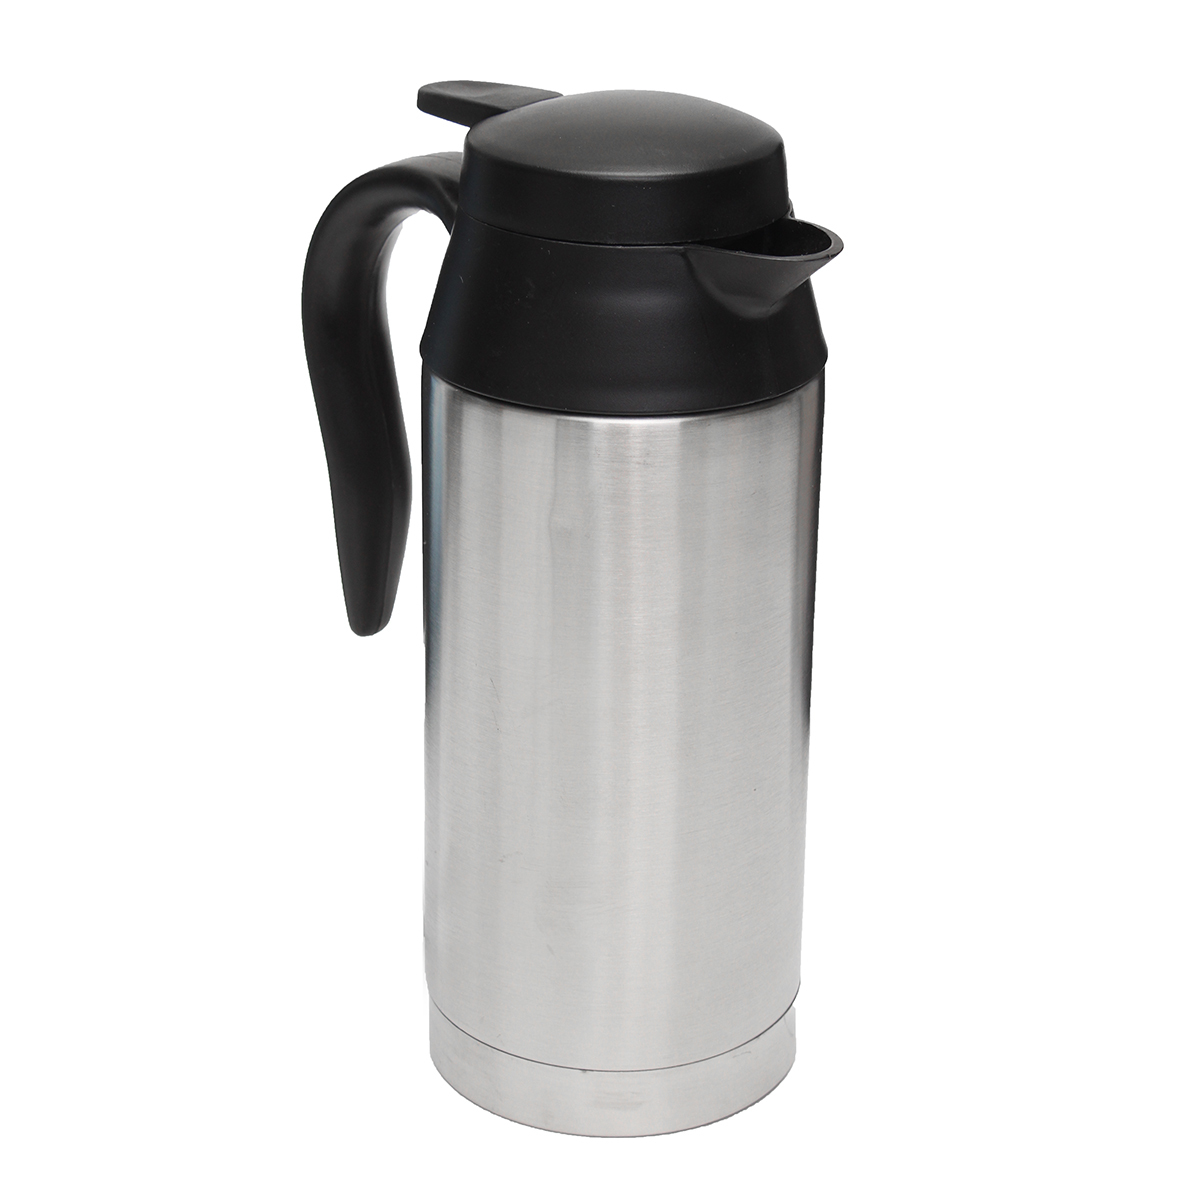 12V 750ml Stainless Steel Electric In-Car Kettle Car Travel Heating Water Bottle 2